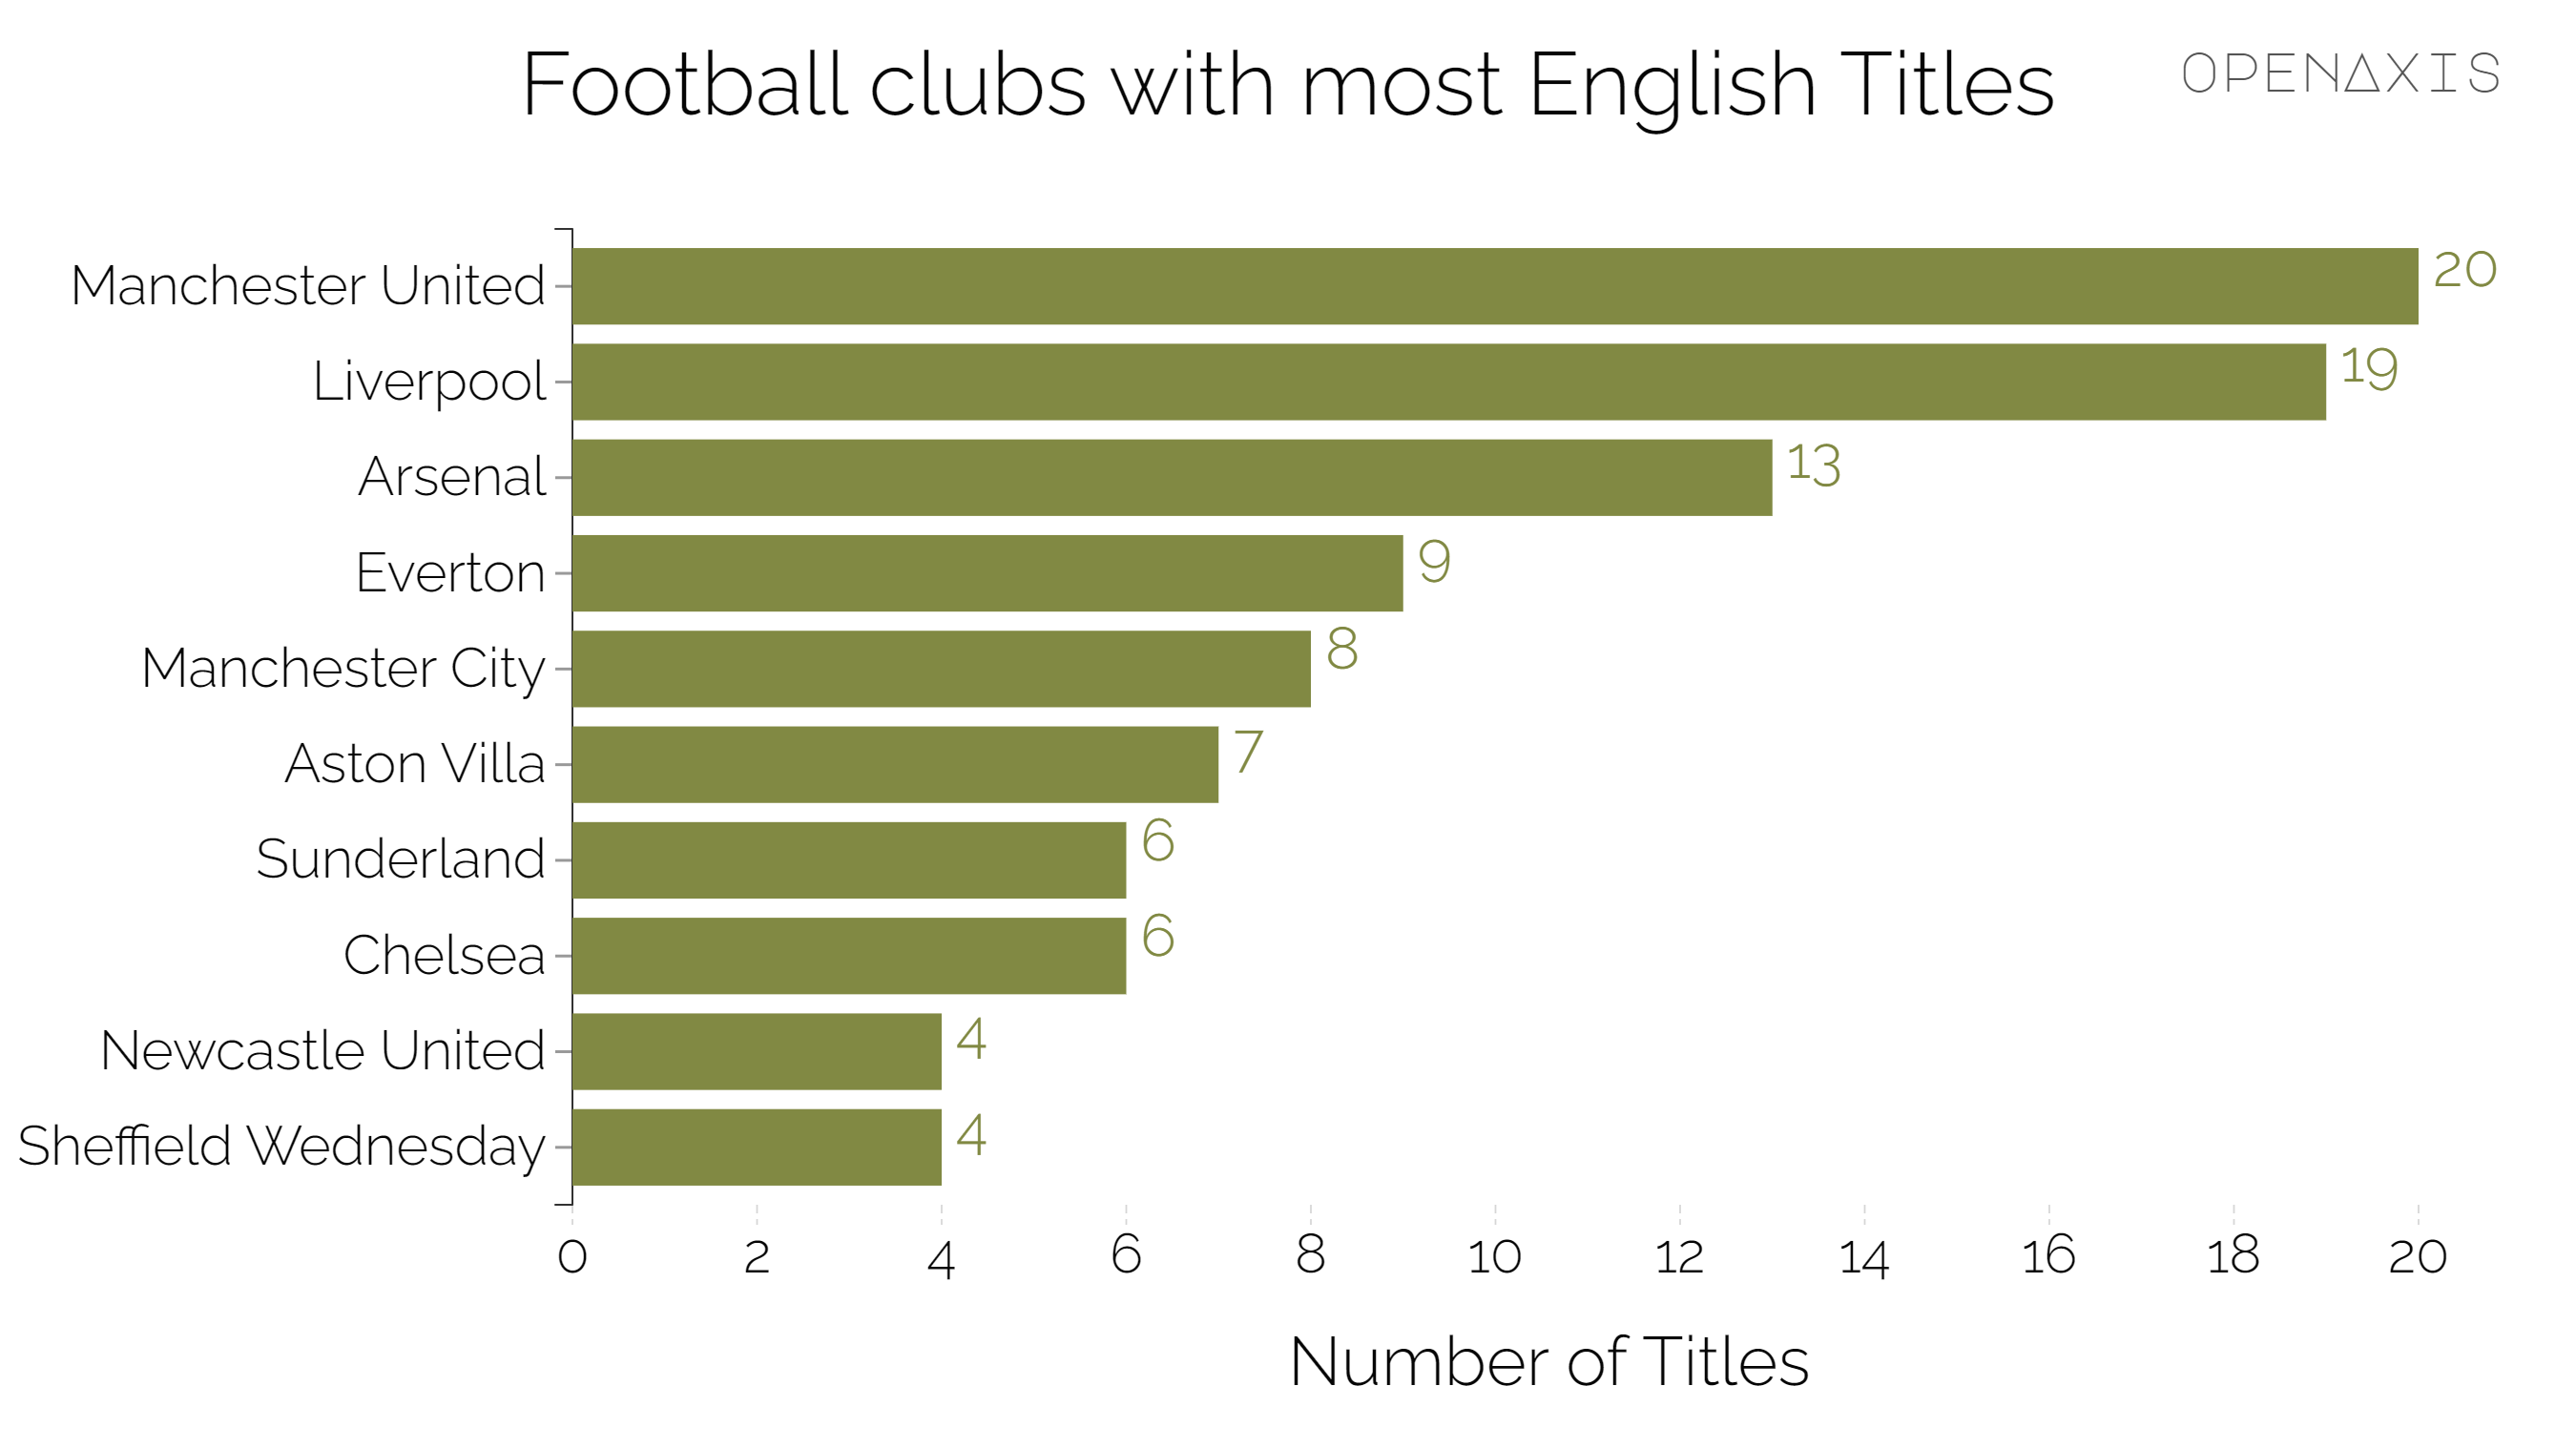 <p>There are 24 clubs who have won the English title, including 7 who have won the Premier League (1992–present). The most recent to join the list were Leicester City (2015–2016 champions) and before that, Nottingham Forest (1977–1978) and Derby County (1971–1972).</p><p><br /></p><p>The English Premier League is England's top-flight league and the most valuable league in the world. Its revenue generation has been tremendous since its inception, as it is the most commercially successful league in the world. It is also regarded as the most-watched league globally, with an estimated audience of around four billion.</p><p><br /></p><p>As of 2022, it generates over $3.14 billion annually from sponsorship deals, international TV rights, and multiple endorsements. This is why the league's current valuation is at a whopping $9.03 billion.</p><p><br /></p><p><span data-index="0" data-denotation-char data-id="0" data-value="&lt;a href=&quot;/search?q=%23sports&quot; target=_self&gt;#sports" data-link="/search?q=%23sports">﻿<span contenteditable="false"><span></span><a href="/search?q=%23sports" target="_self">#sports</a></span>﻿</span> <span data-index="0" data-denotation-char data-id="0" data-value="&lt;a href=&quot;/search?q=%23entertainment&quot; target=_self&gt;#entertainment" data-link="/search?q=%23entertainment">﻿<span contenteditable="false"><span></span><a href="/search?q=%23entertainment" target="_self">#entertainment</a></span>﻿</span></p><p><br /></p><p>Source: <a href="/data/3997" target="_blank">English Football Association, English Premier League, Wikipedia</a></p><p><br /></p>